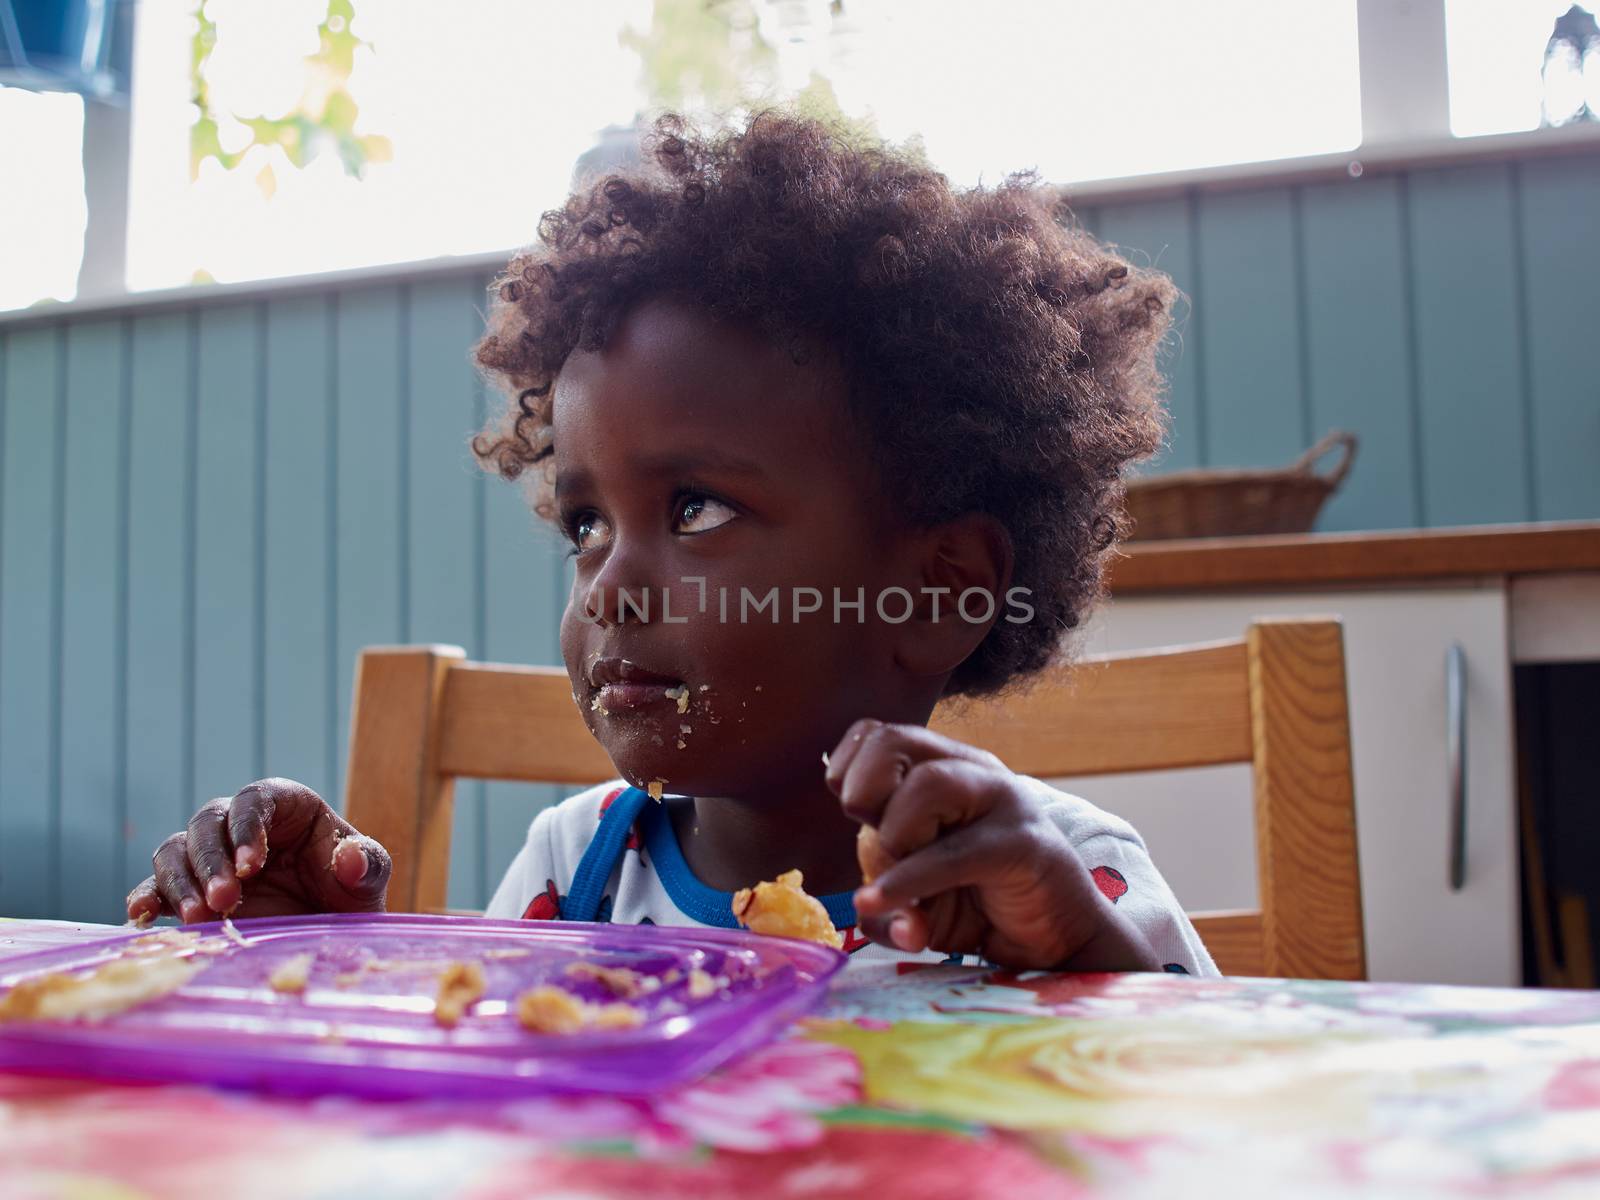 Adorable black African baby eating by Ronyzmbow